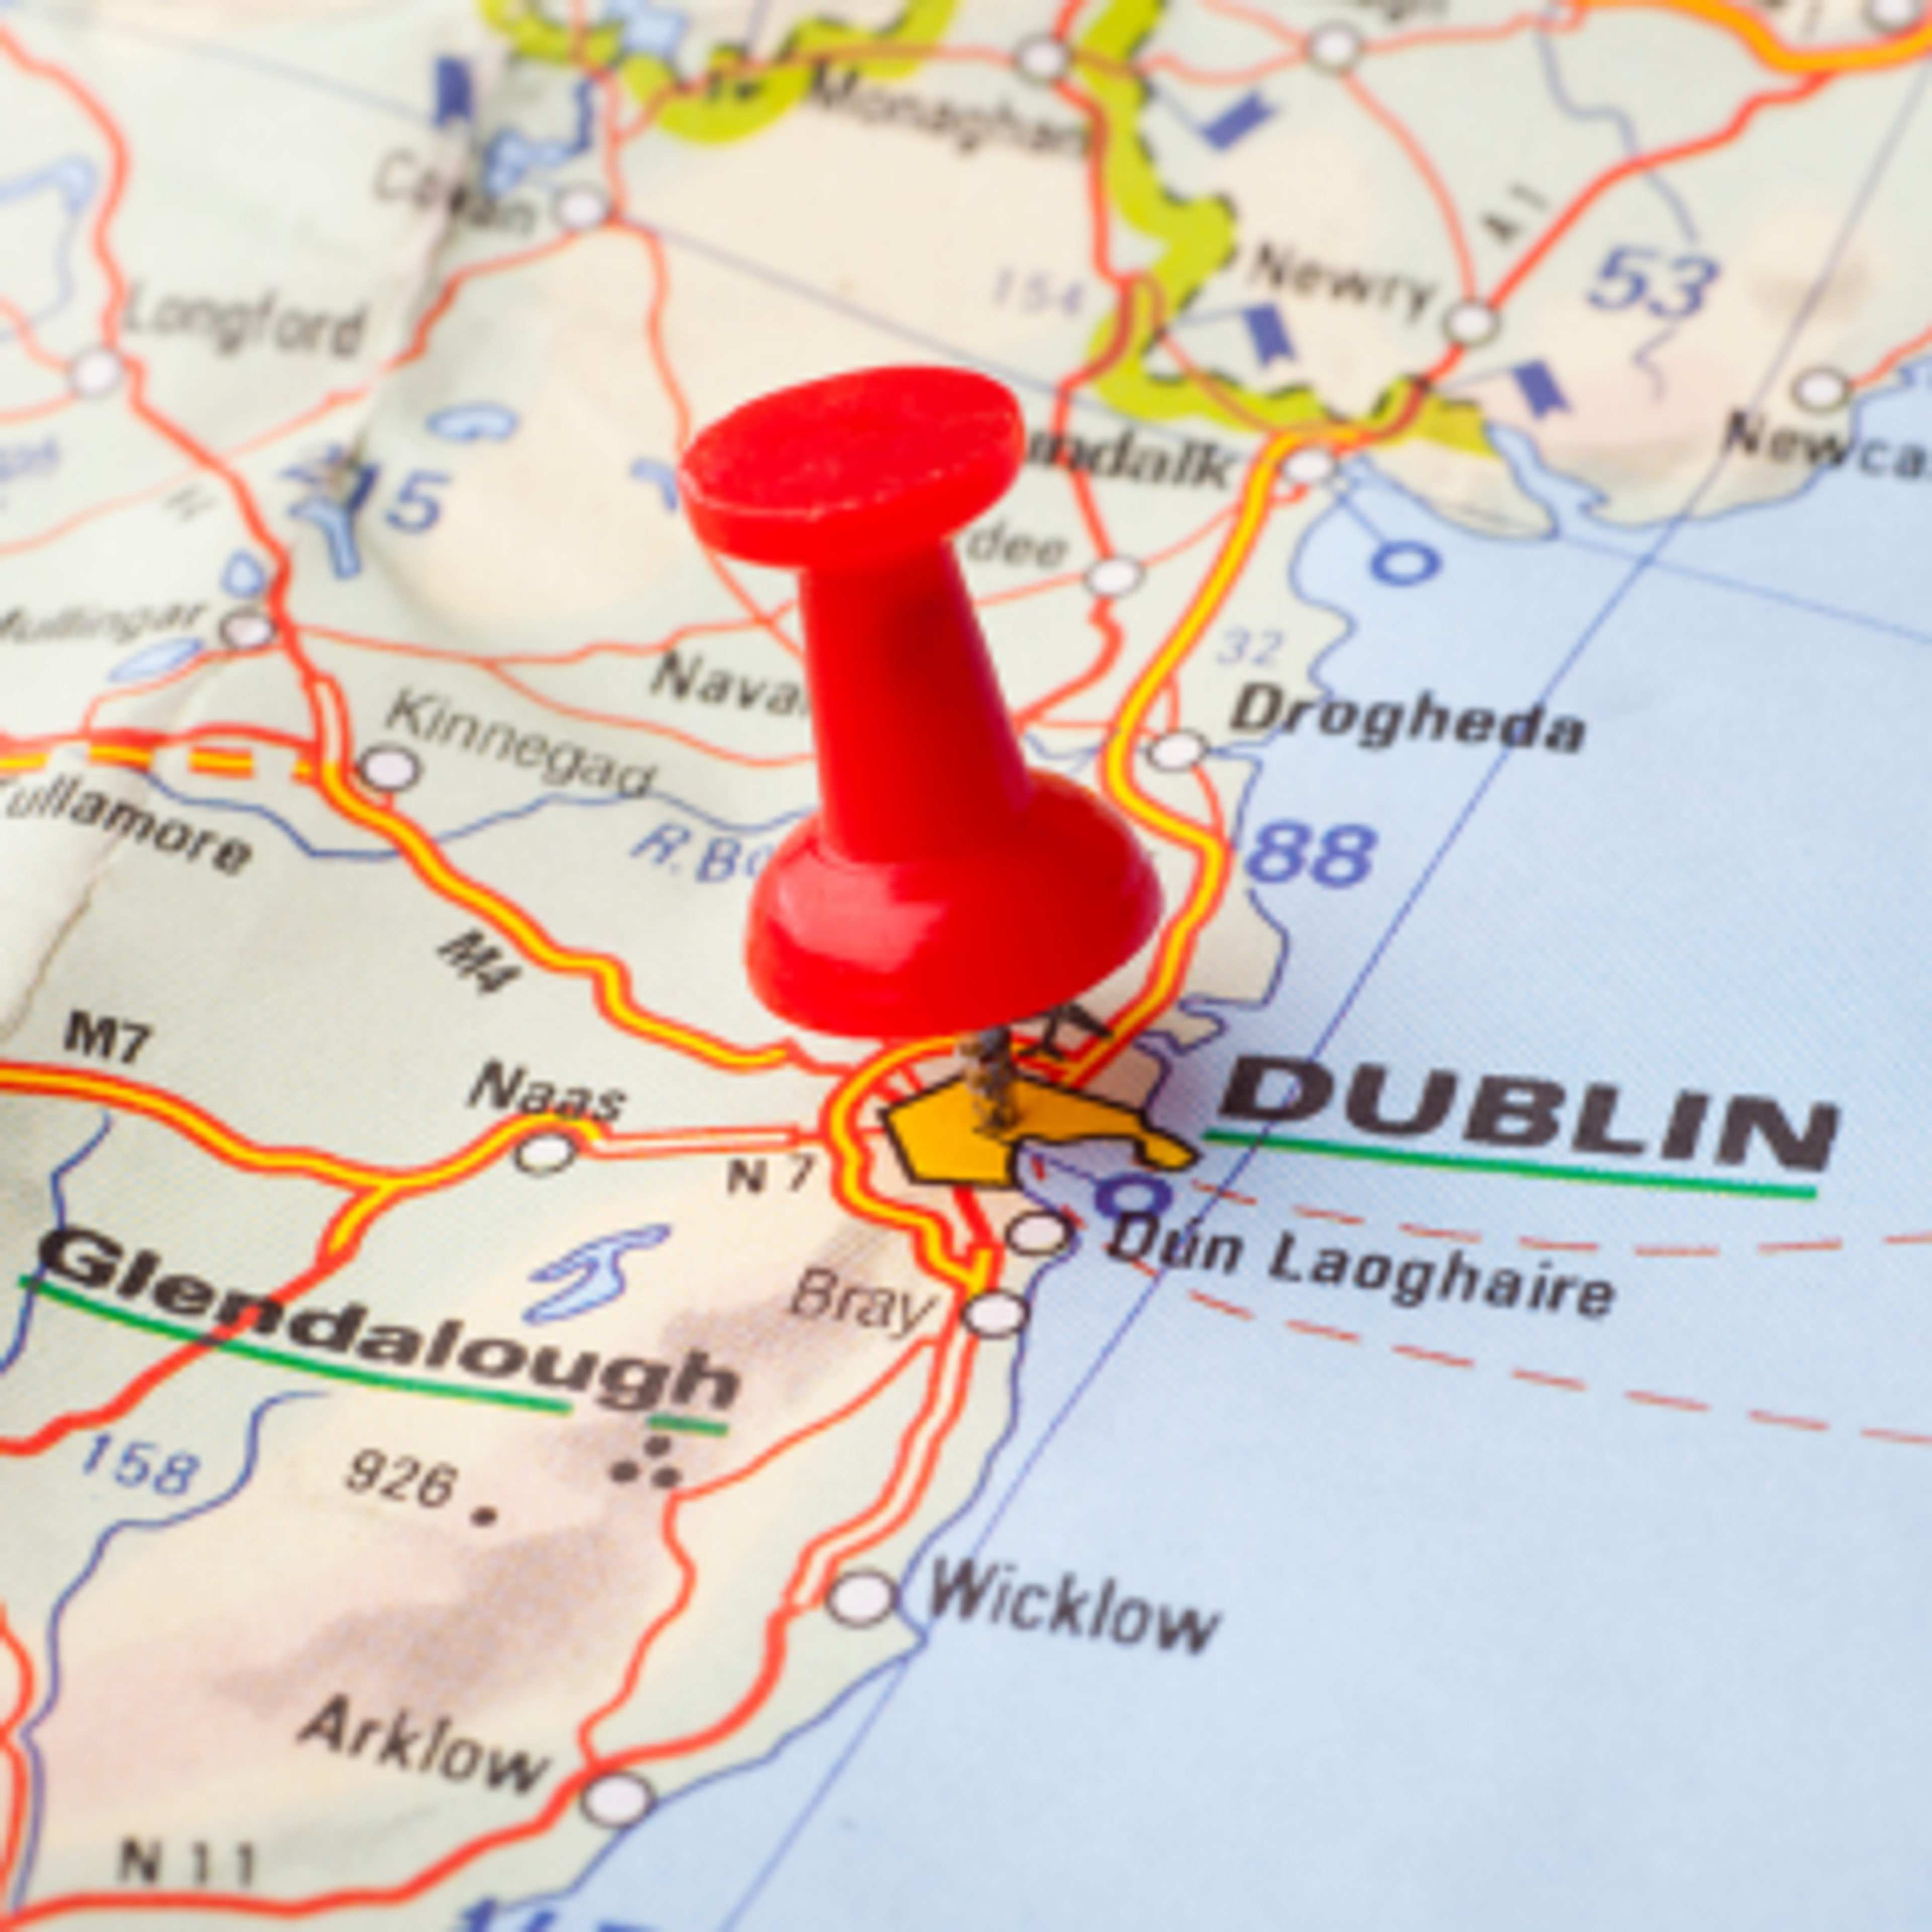 Explore Dublin like a pro by using the bus